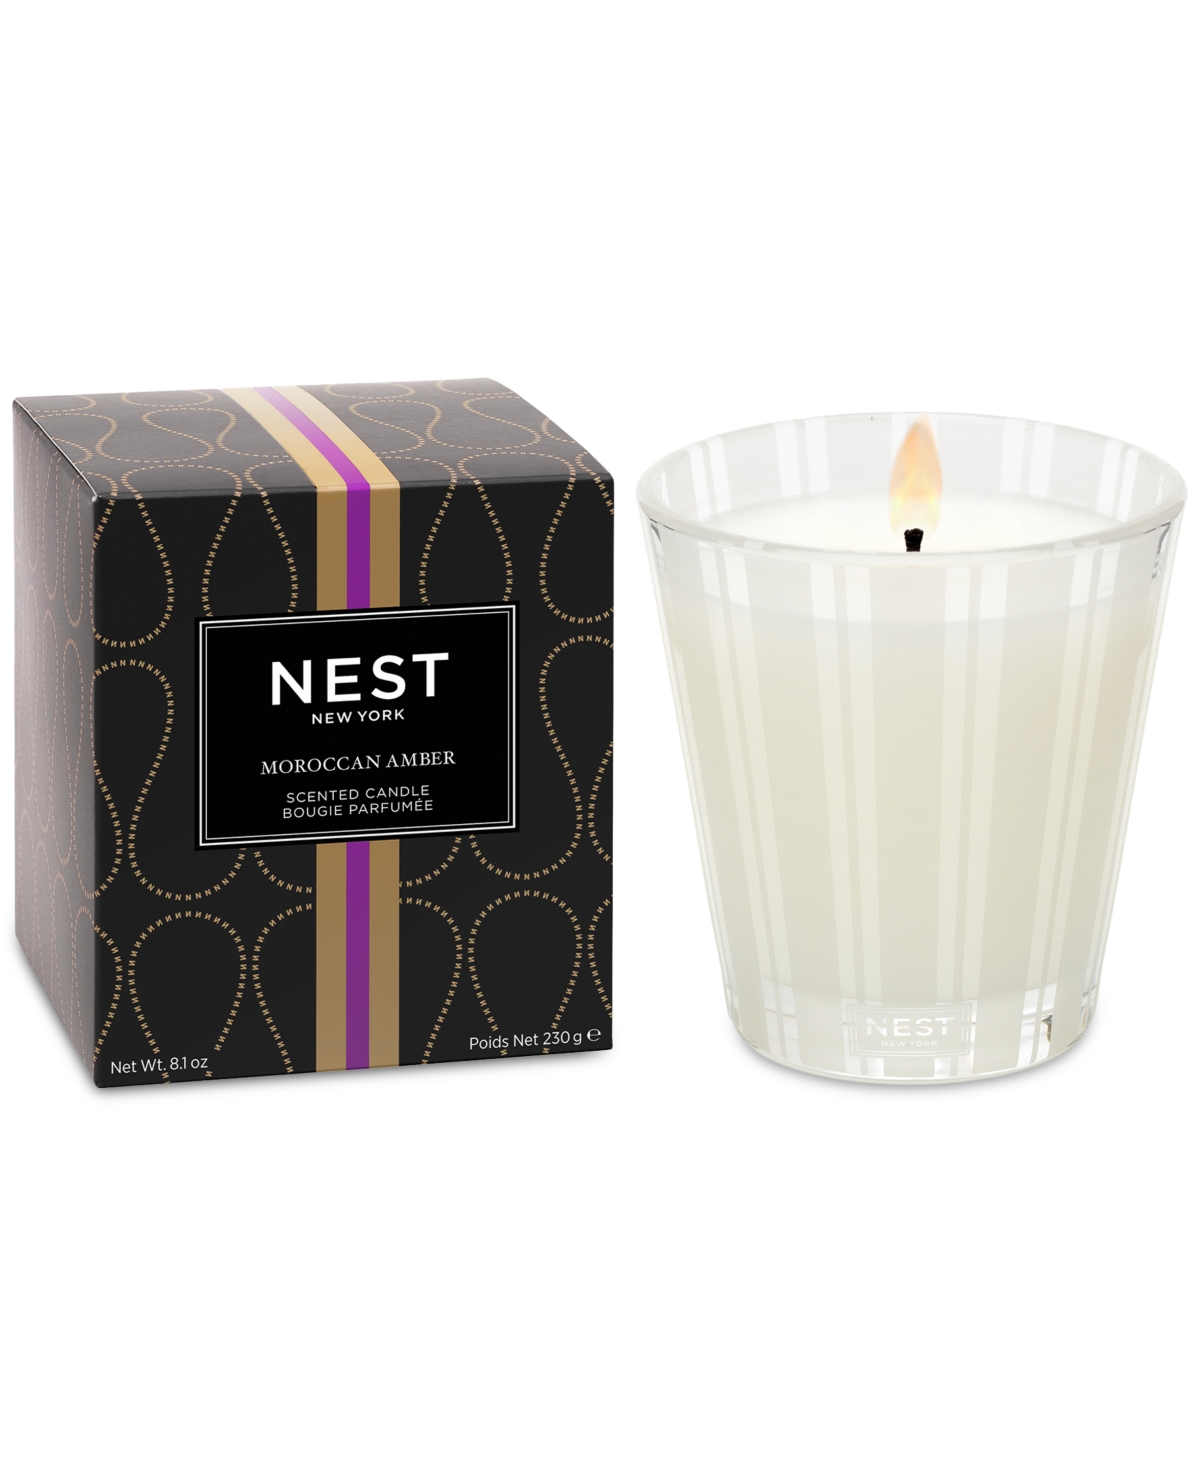 Nest New York Moroccan Amber Scented Candle, 8.1 Oz.